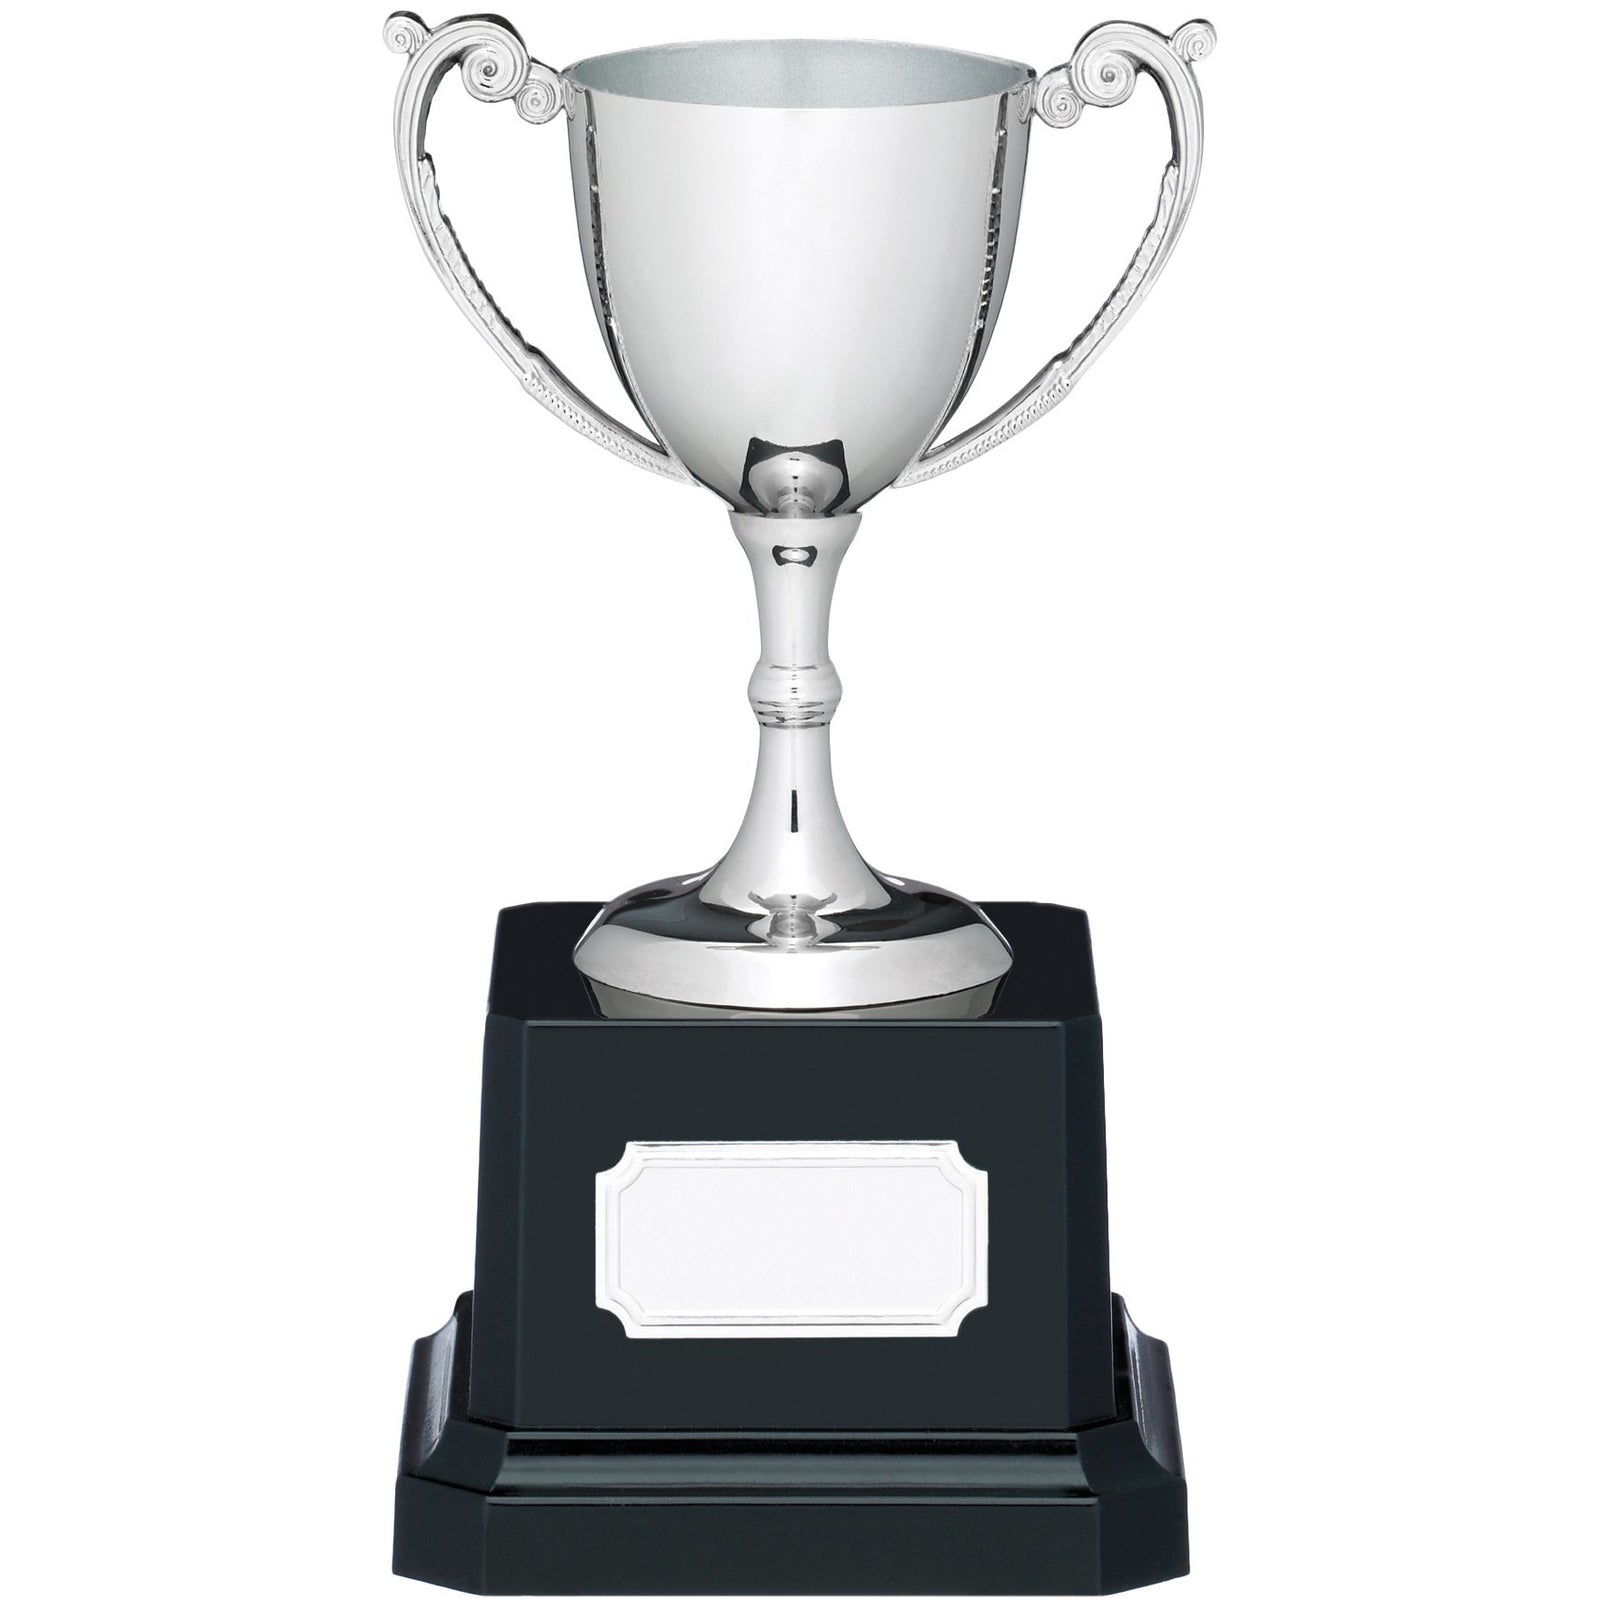 Nickel Plated Trophy Cup - Ornate Handles on Square Base